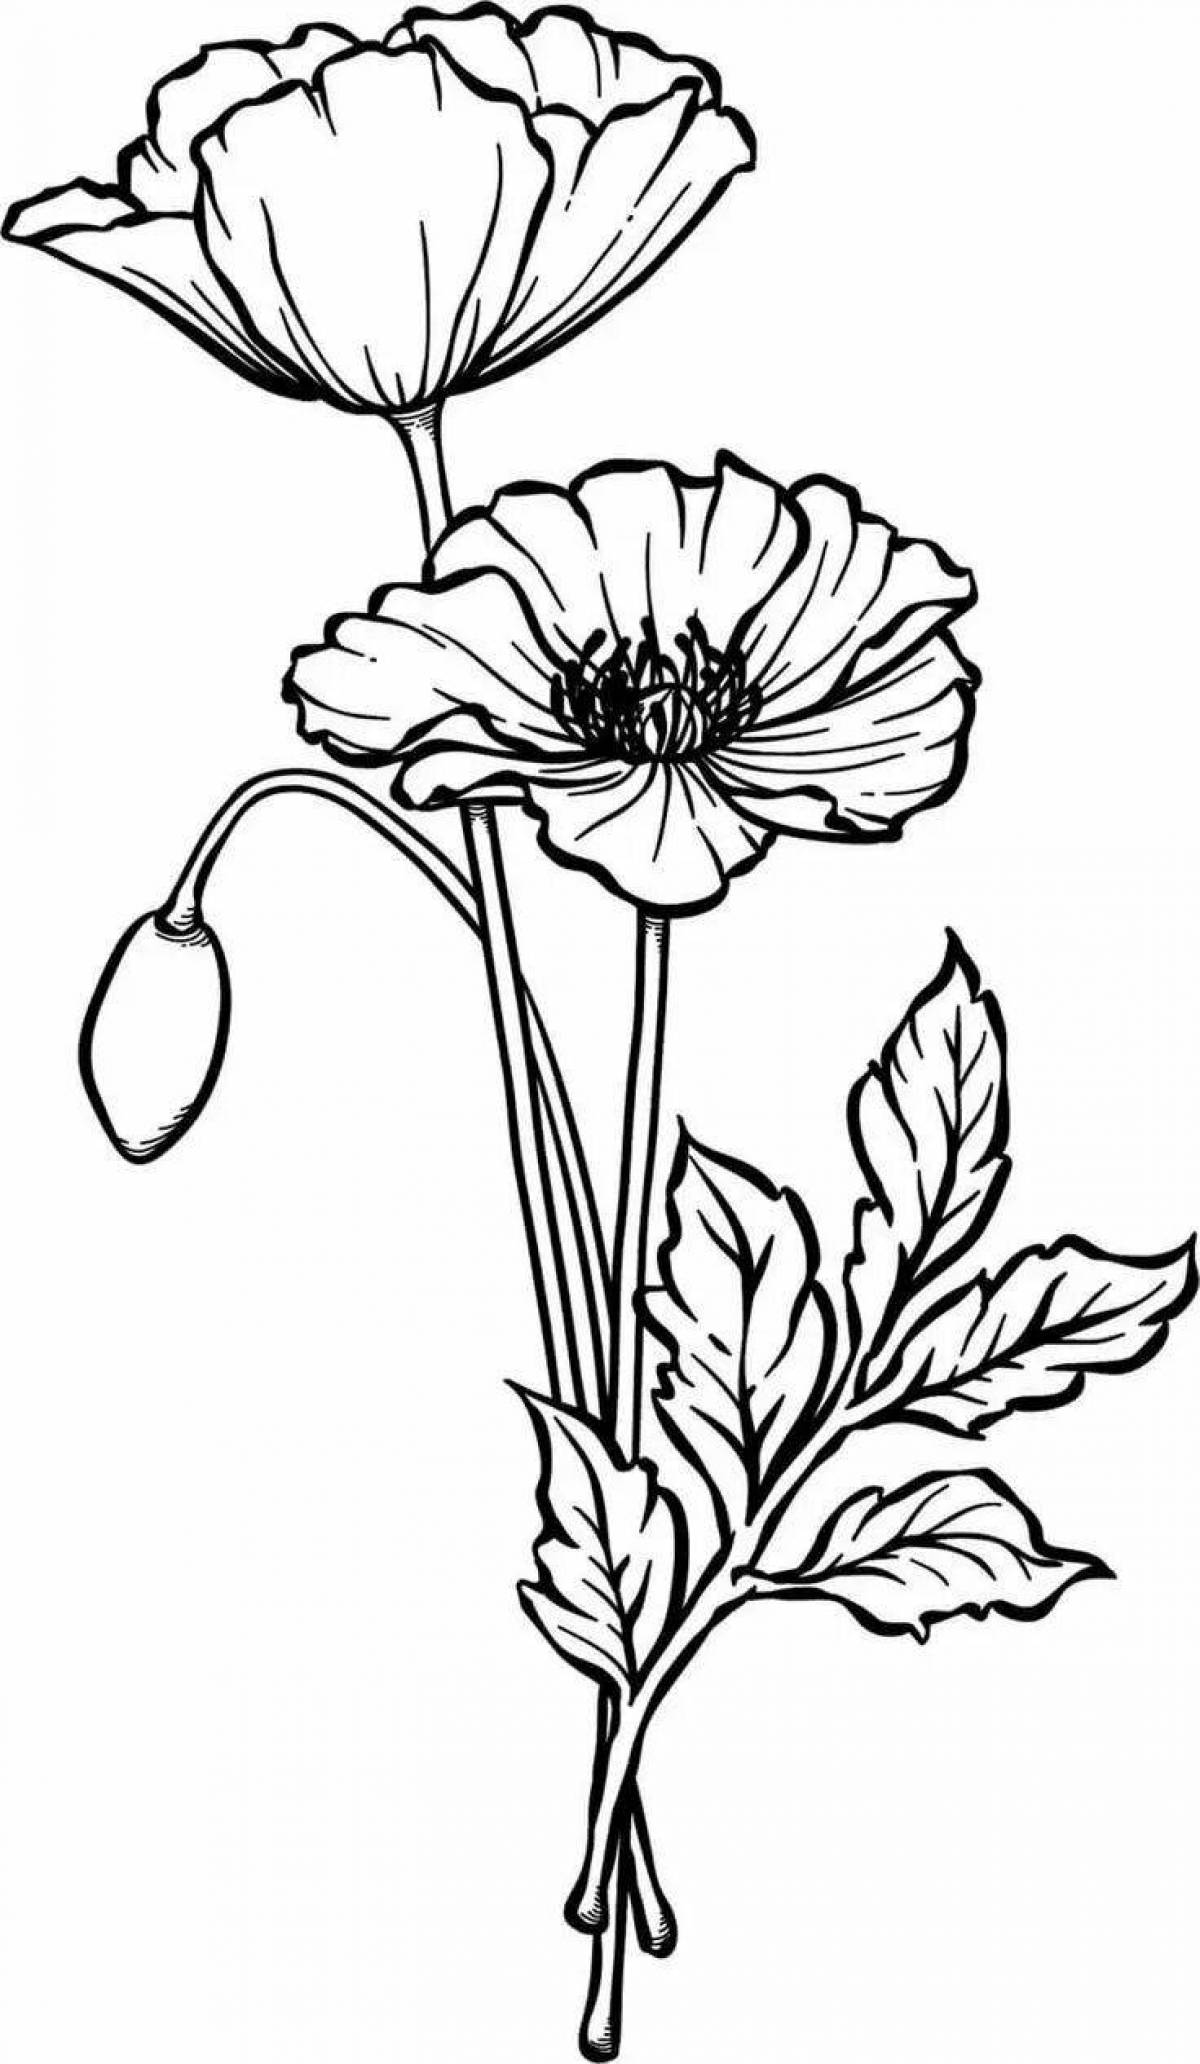 Exquisite poppy coloring book for kids